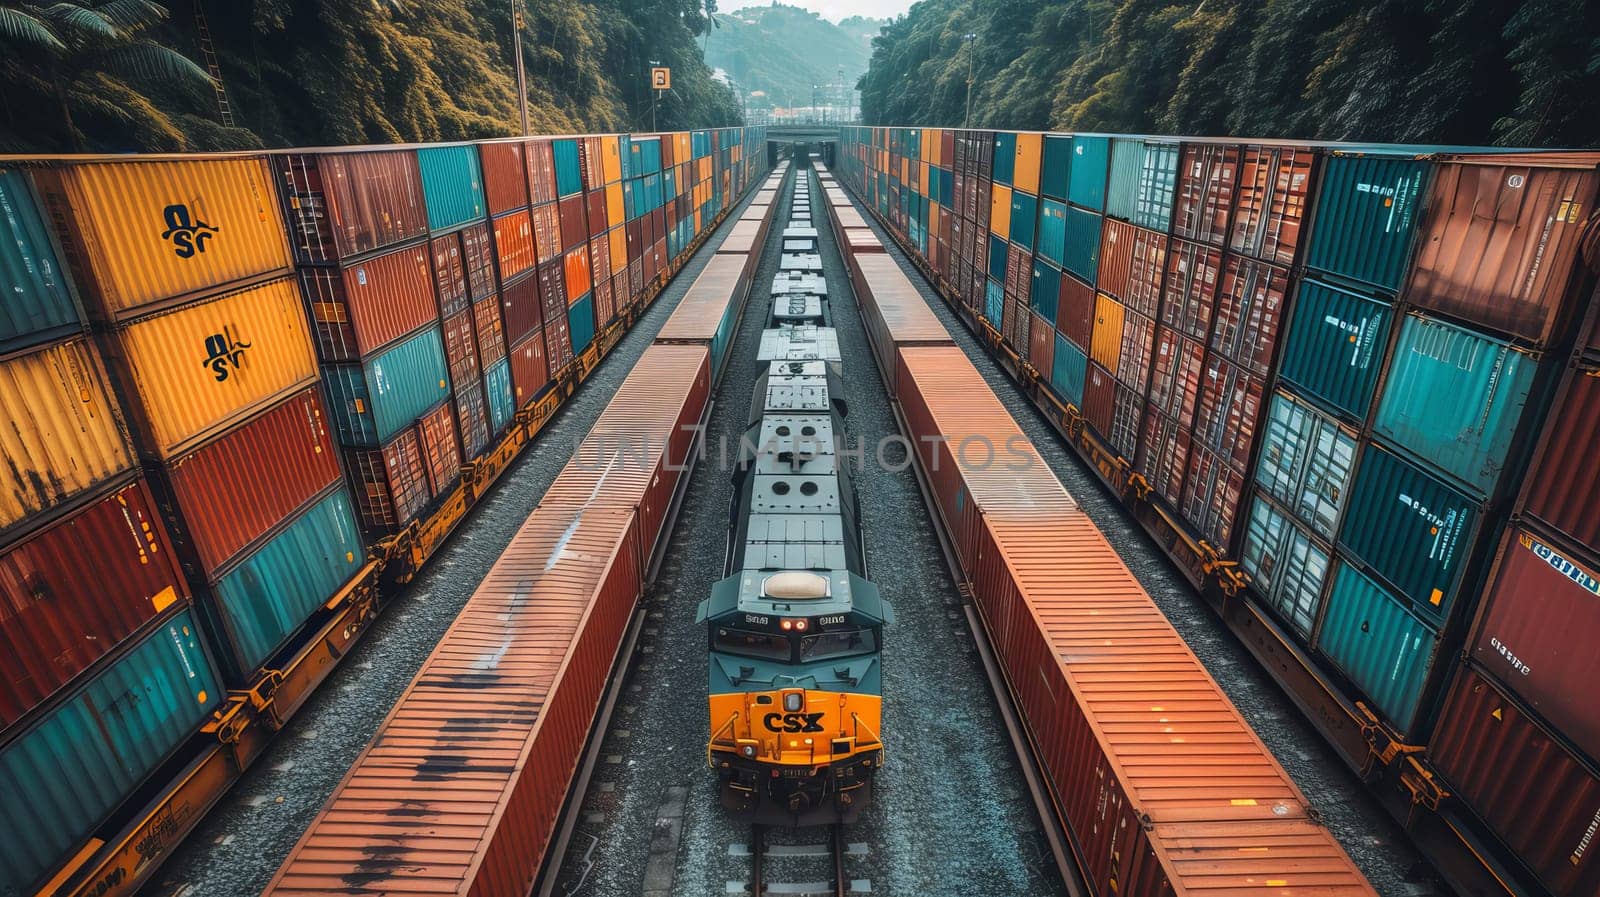 Business logistics concept of Container Cargo freight trains for air cargo trucking, rail transportation, and shipping online goods worldwide by Andrei_01